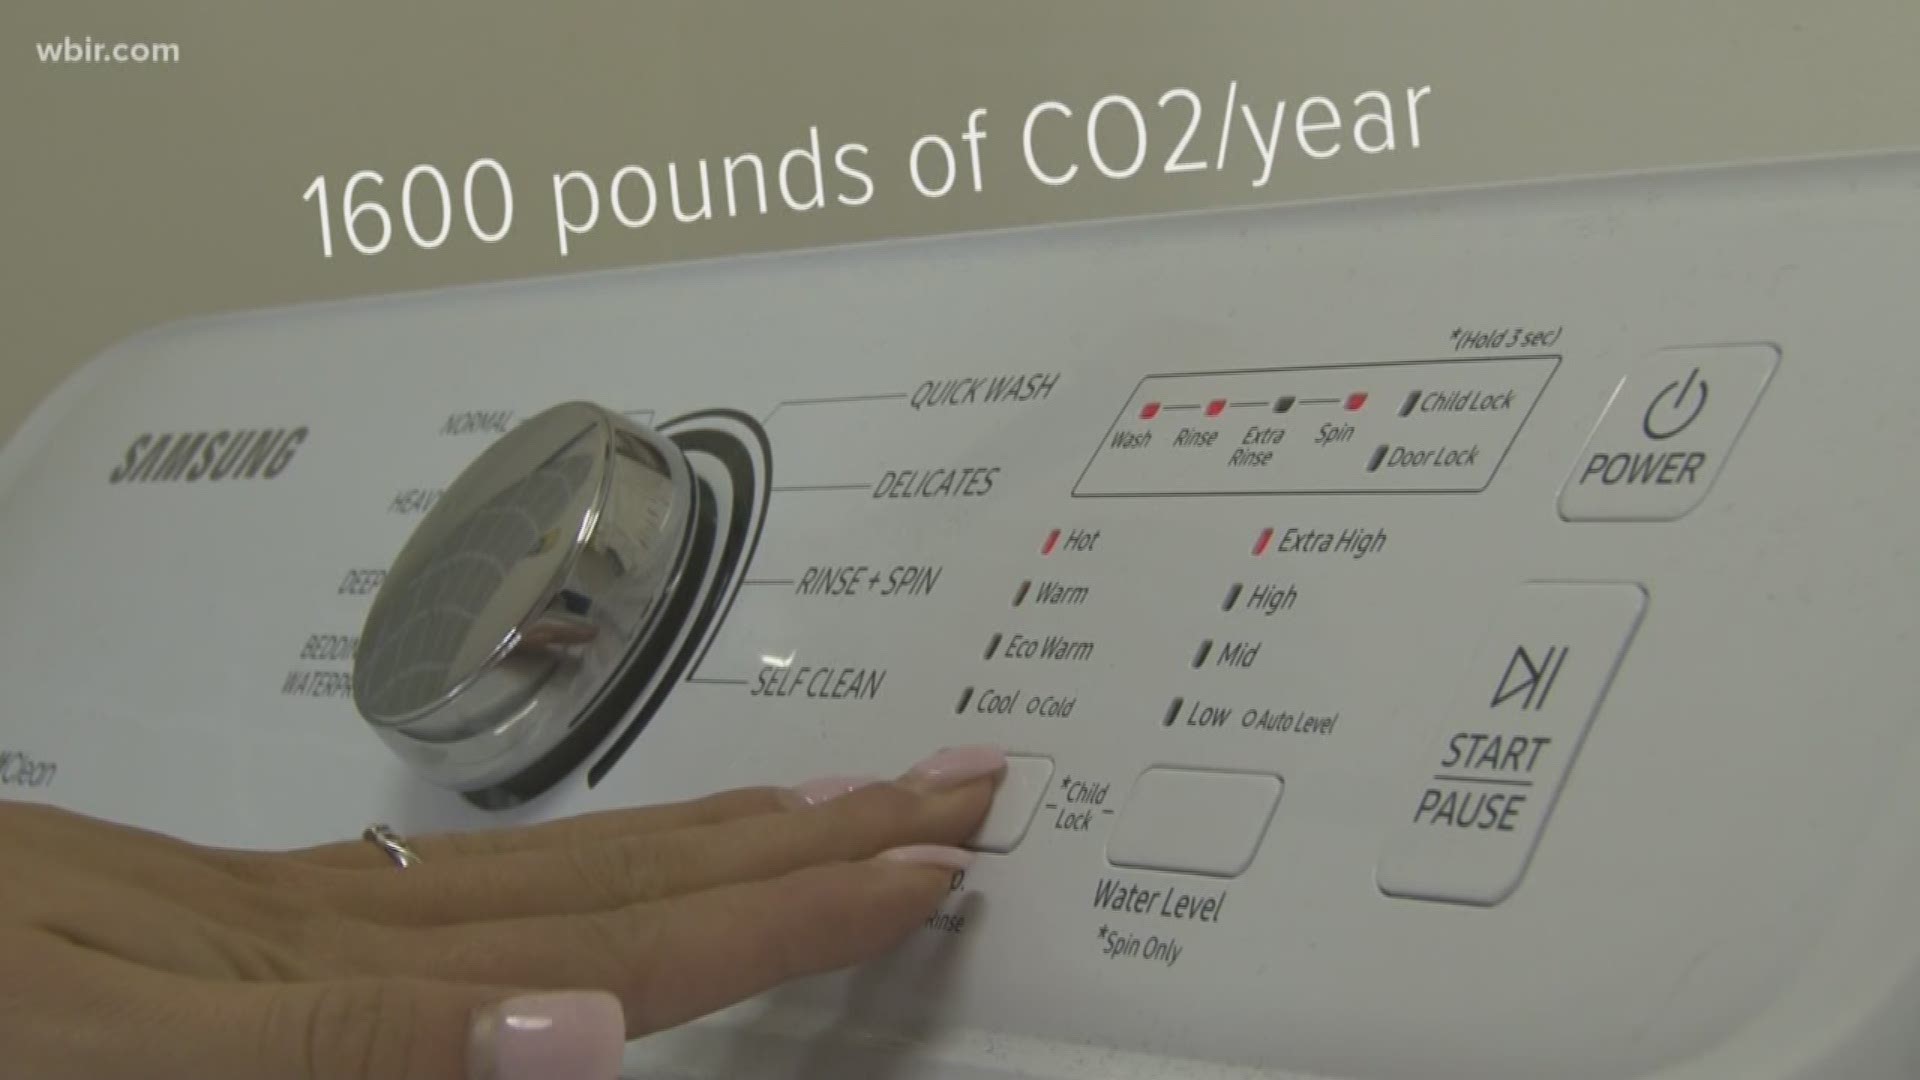 We're finding easy ways to help the planet and passing them on to you. Today, 10News reporter Katie Inman shows us some hacks that will help save you energy and some cash.